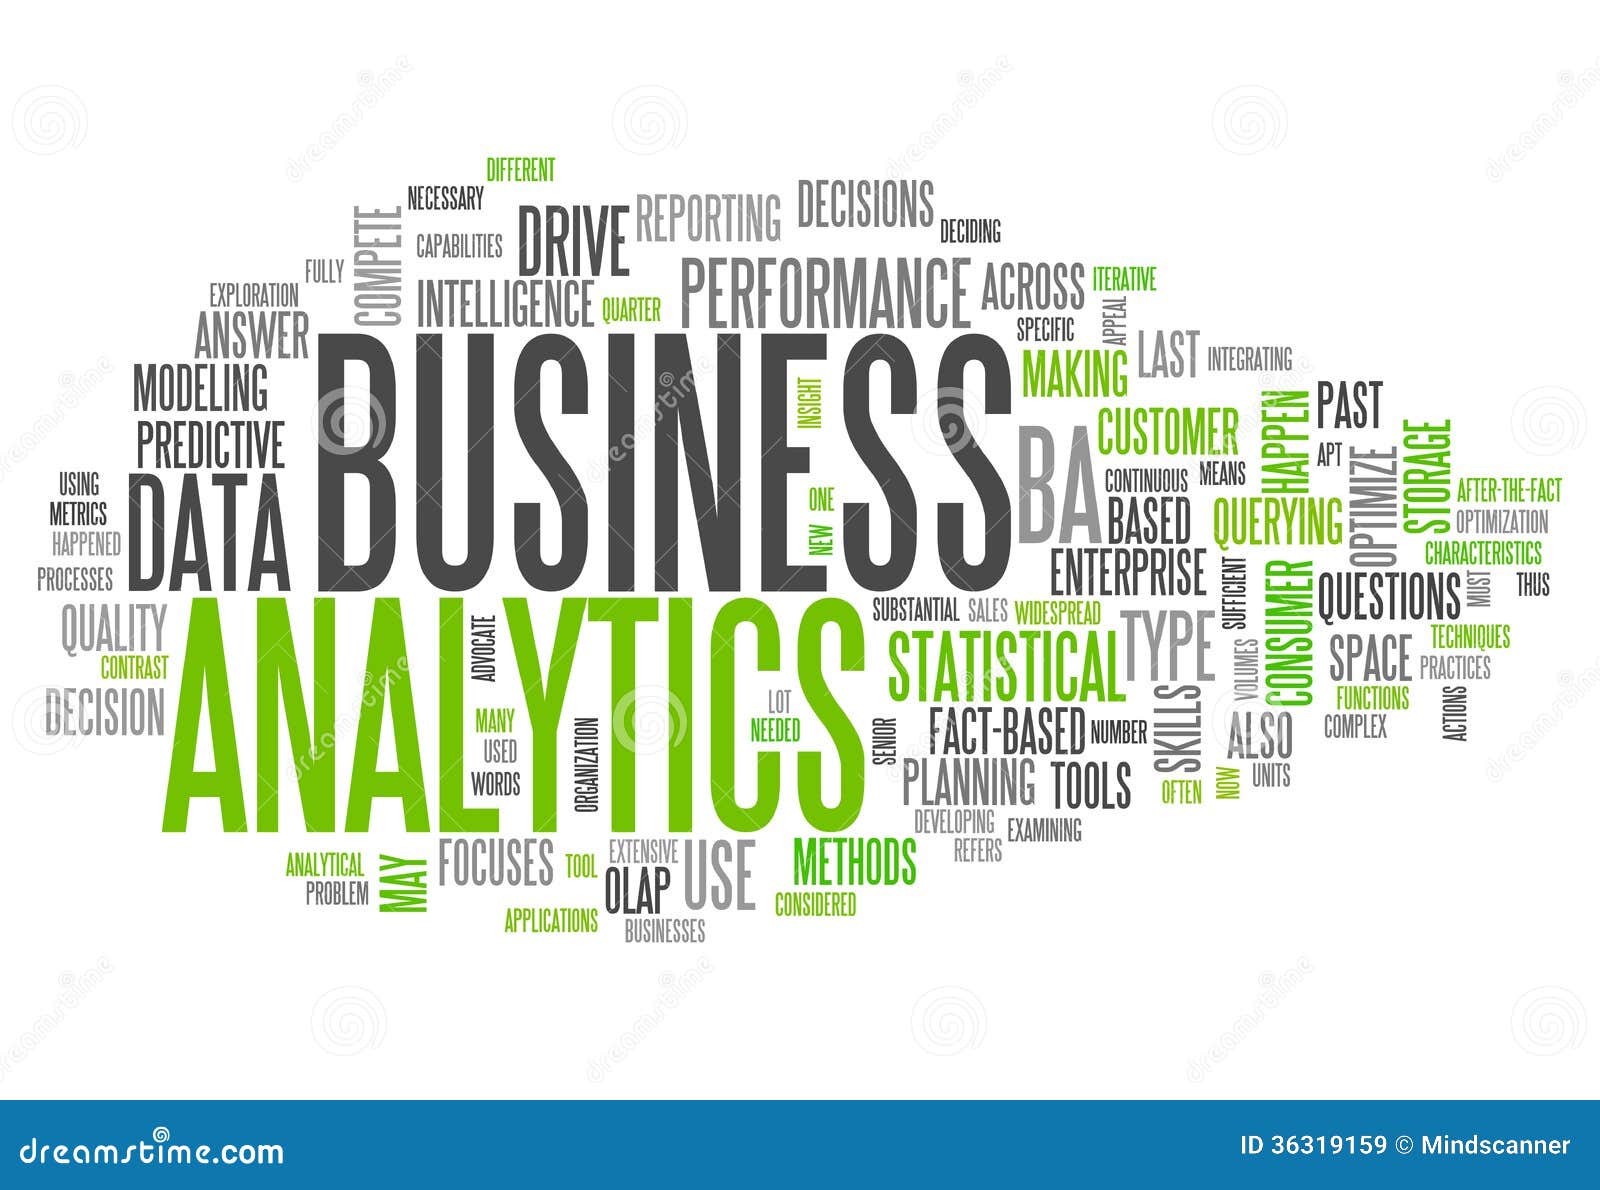 business analysis clipart - photo #38